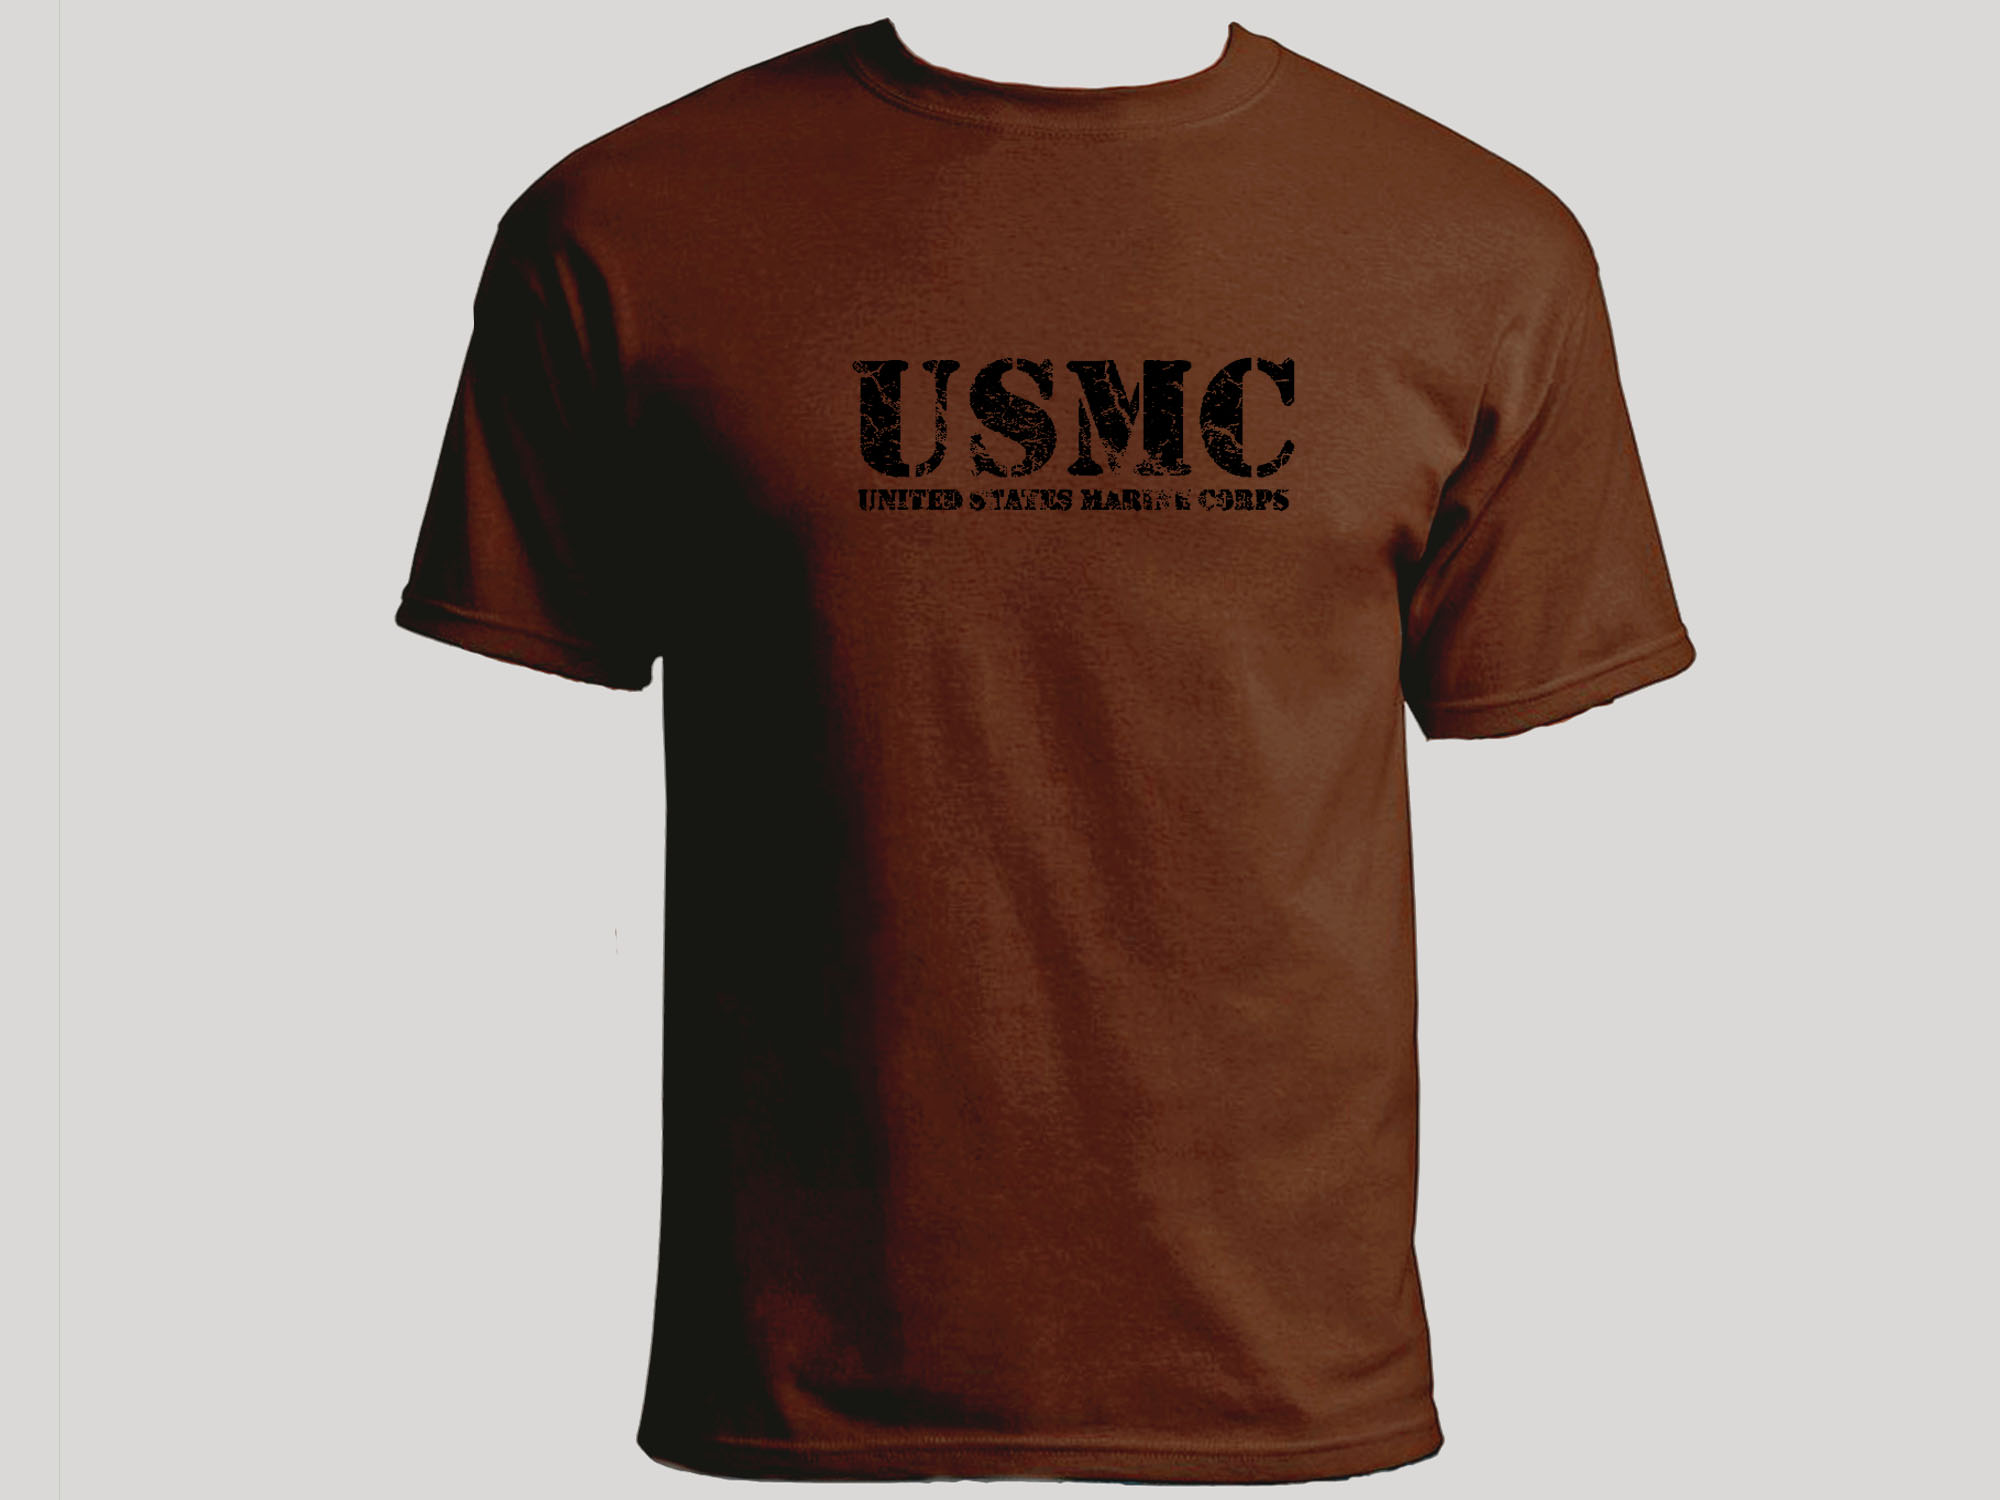 US army marine corps USMC distressed look brown t-shirt 2